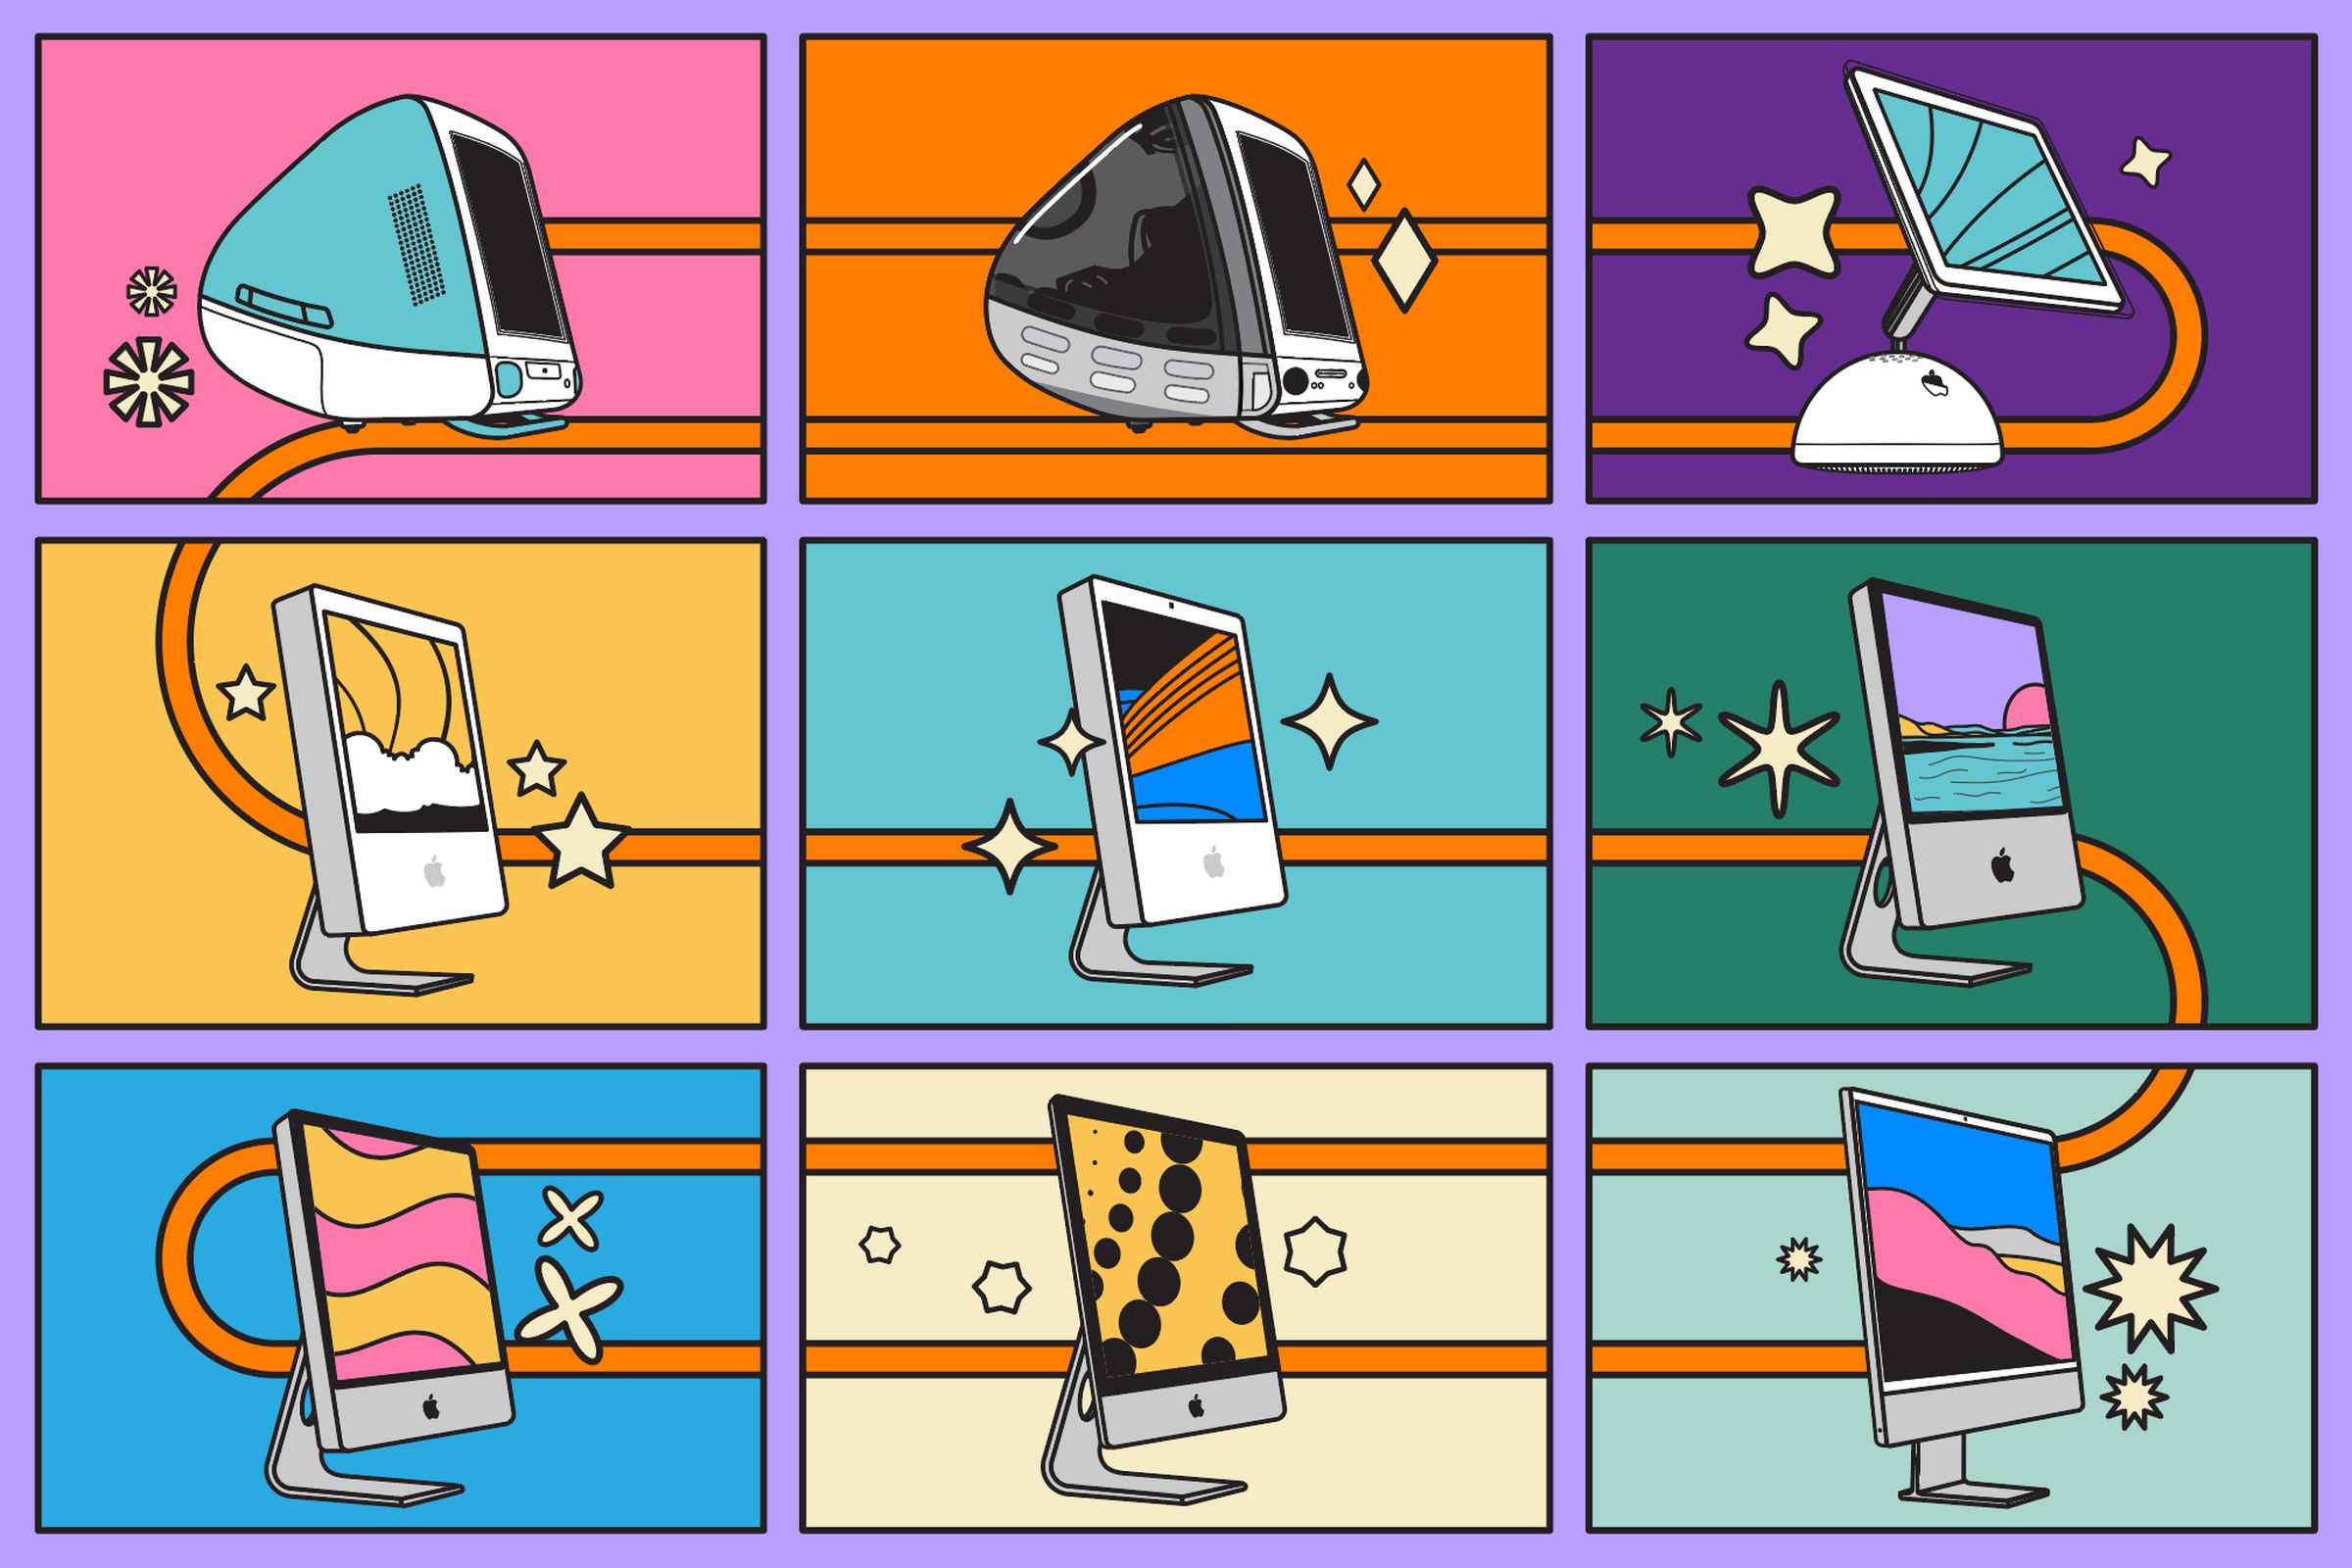 illustrations of each iMac design iteration in a grid of nine squares and a swirling line following them chronologically.